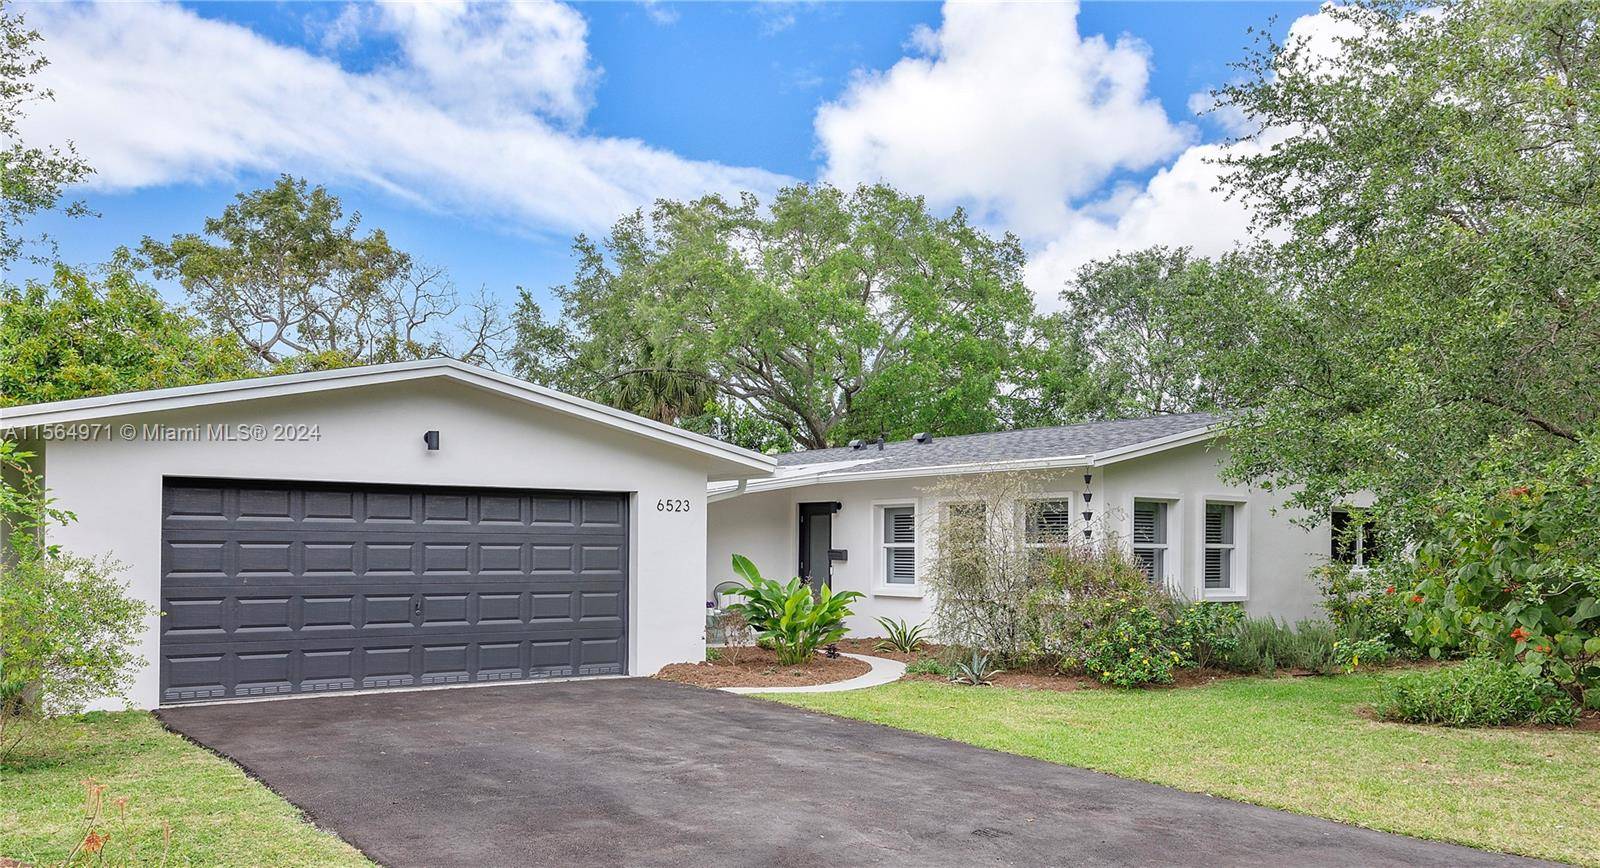 Renovated 3 bedroom, 2 bathroom family home situated on a prime corner lot in South Miami.